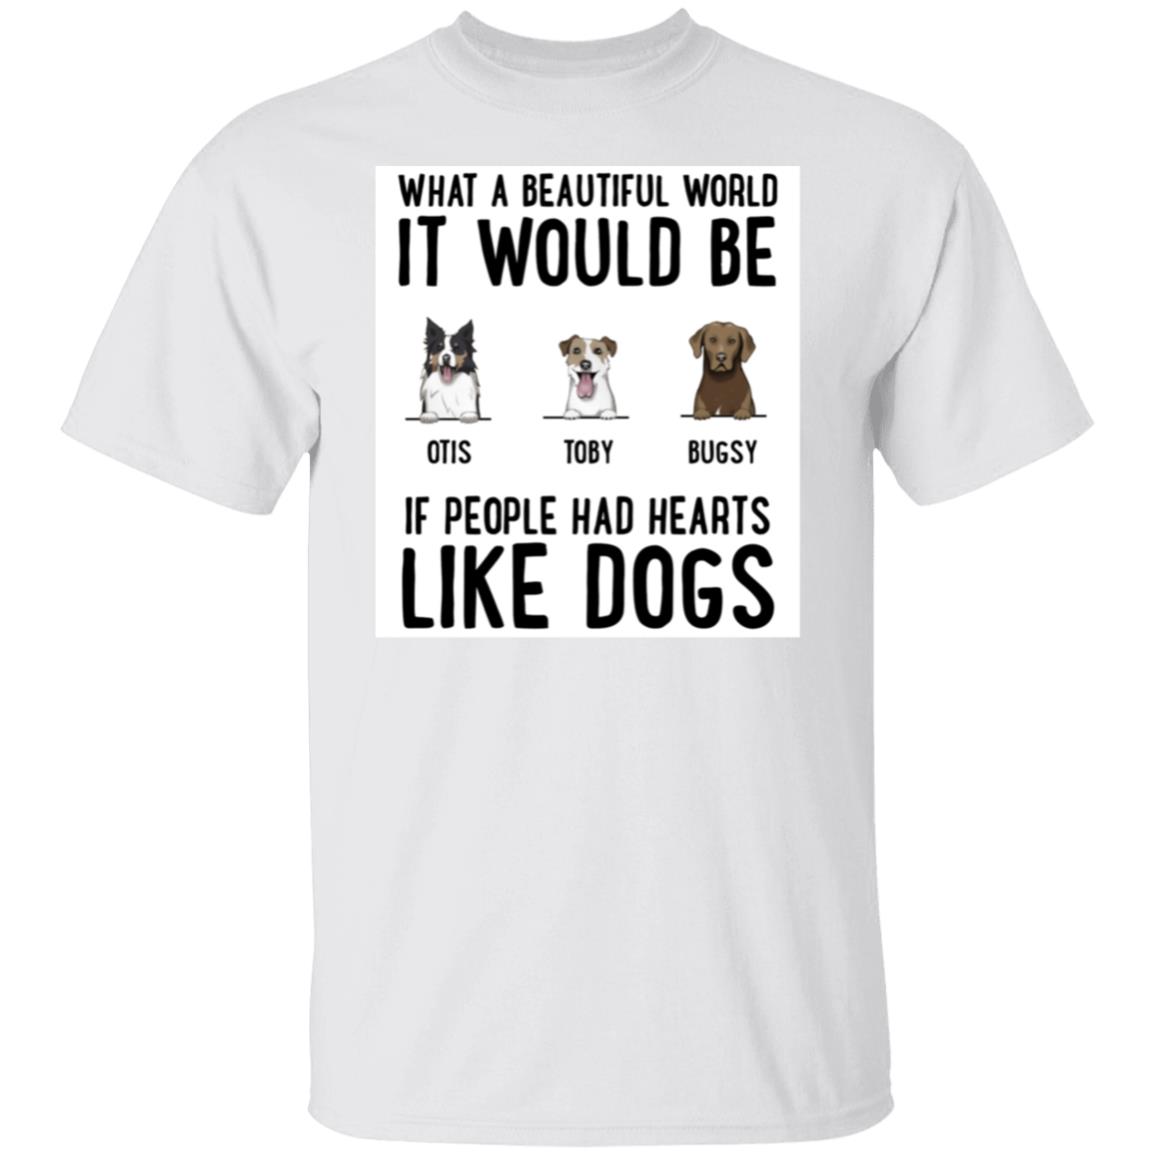 What A Beautiful World It Would Be ... Personalized Standard Tee White – Choose Your Dog’s Breed and Name (Up to 5 Dogs)